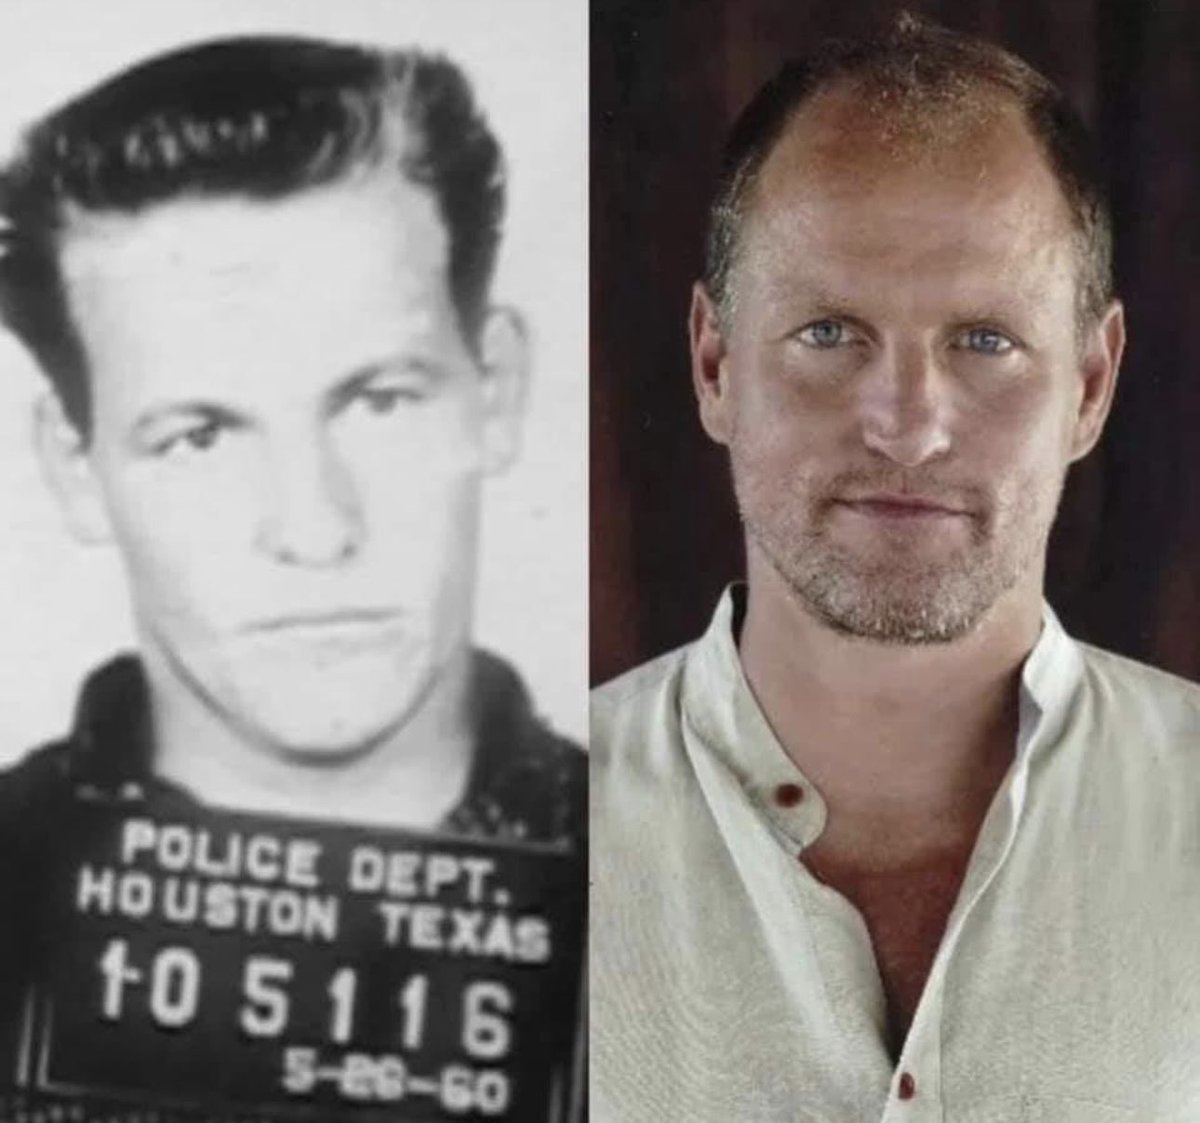 Actor Woody Harrelson’s father, Charles Harrelson, was a convicted hitman who was given a life sentence after killing a federal judge in 1979. He also claimed on multiple occasions to have been the actual assassin of John F. Kennedy.